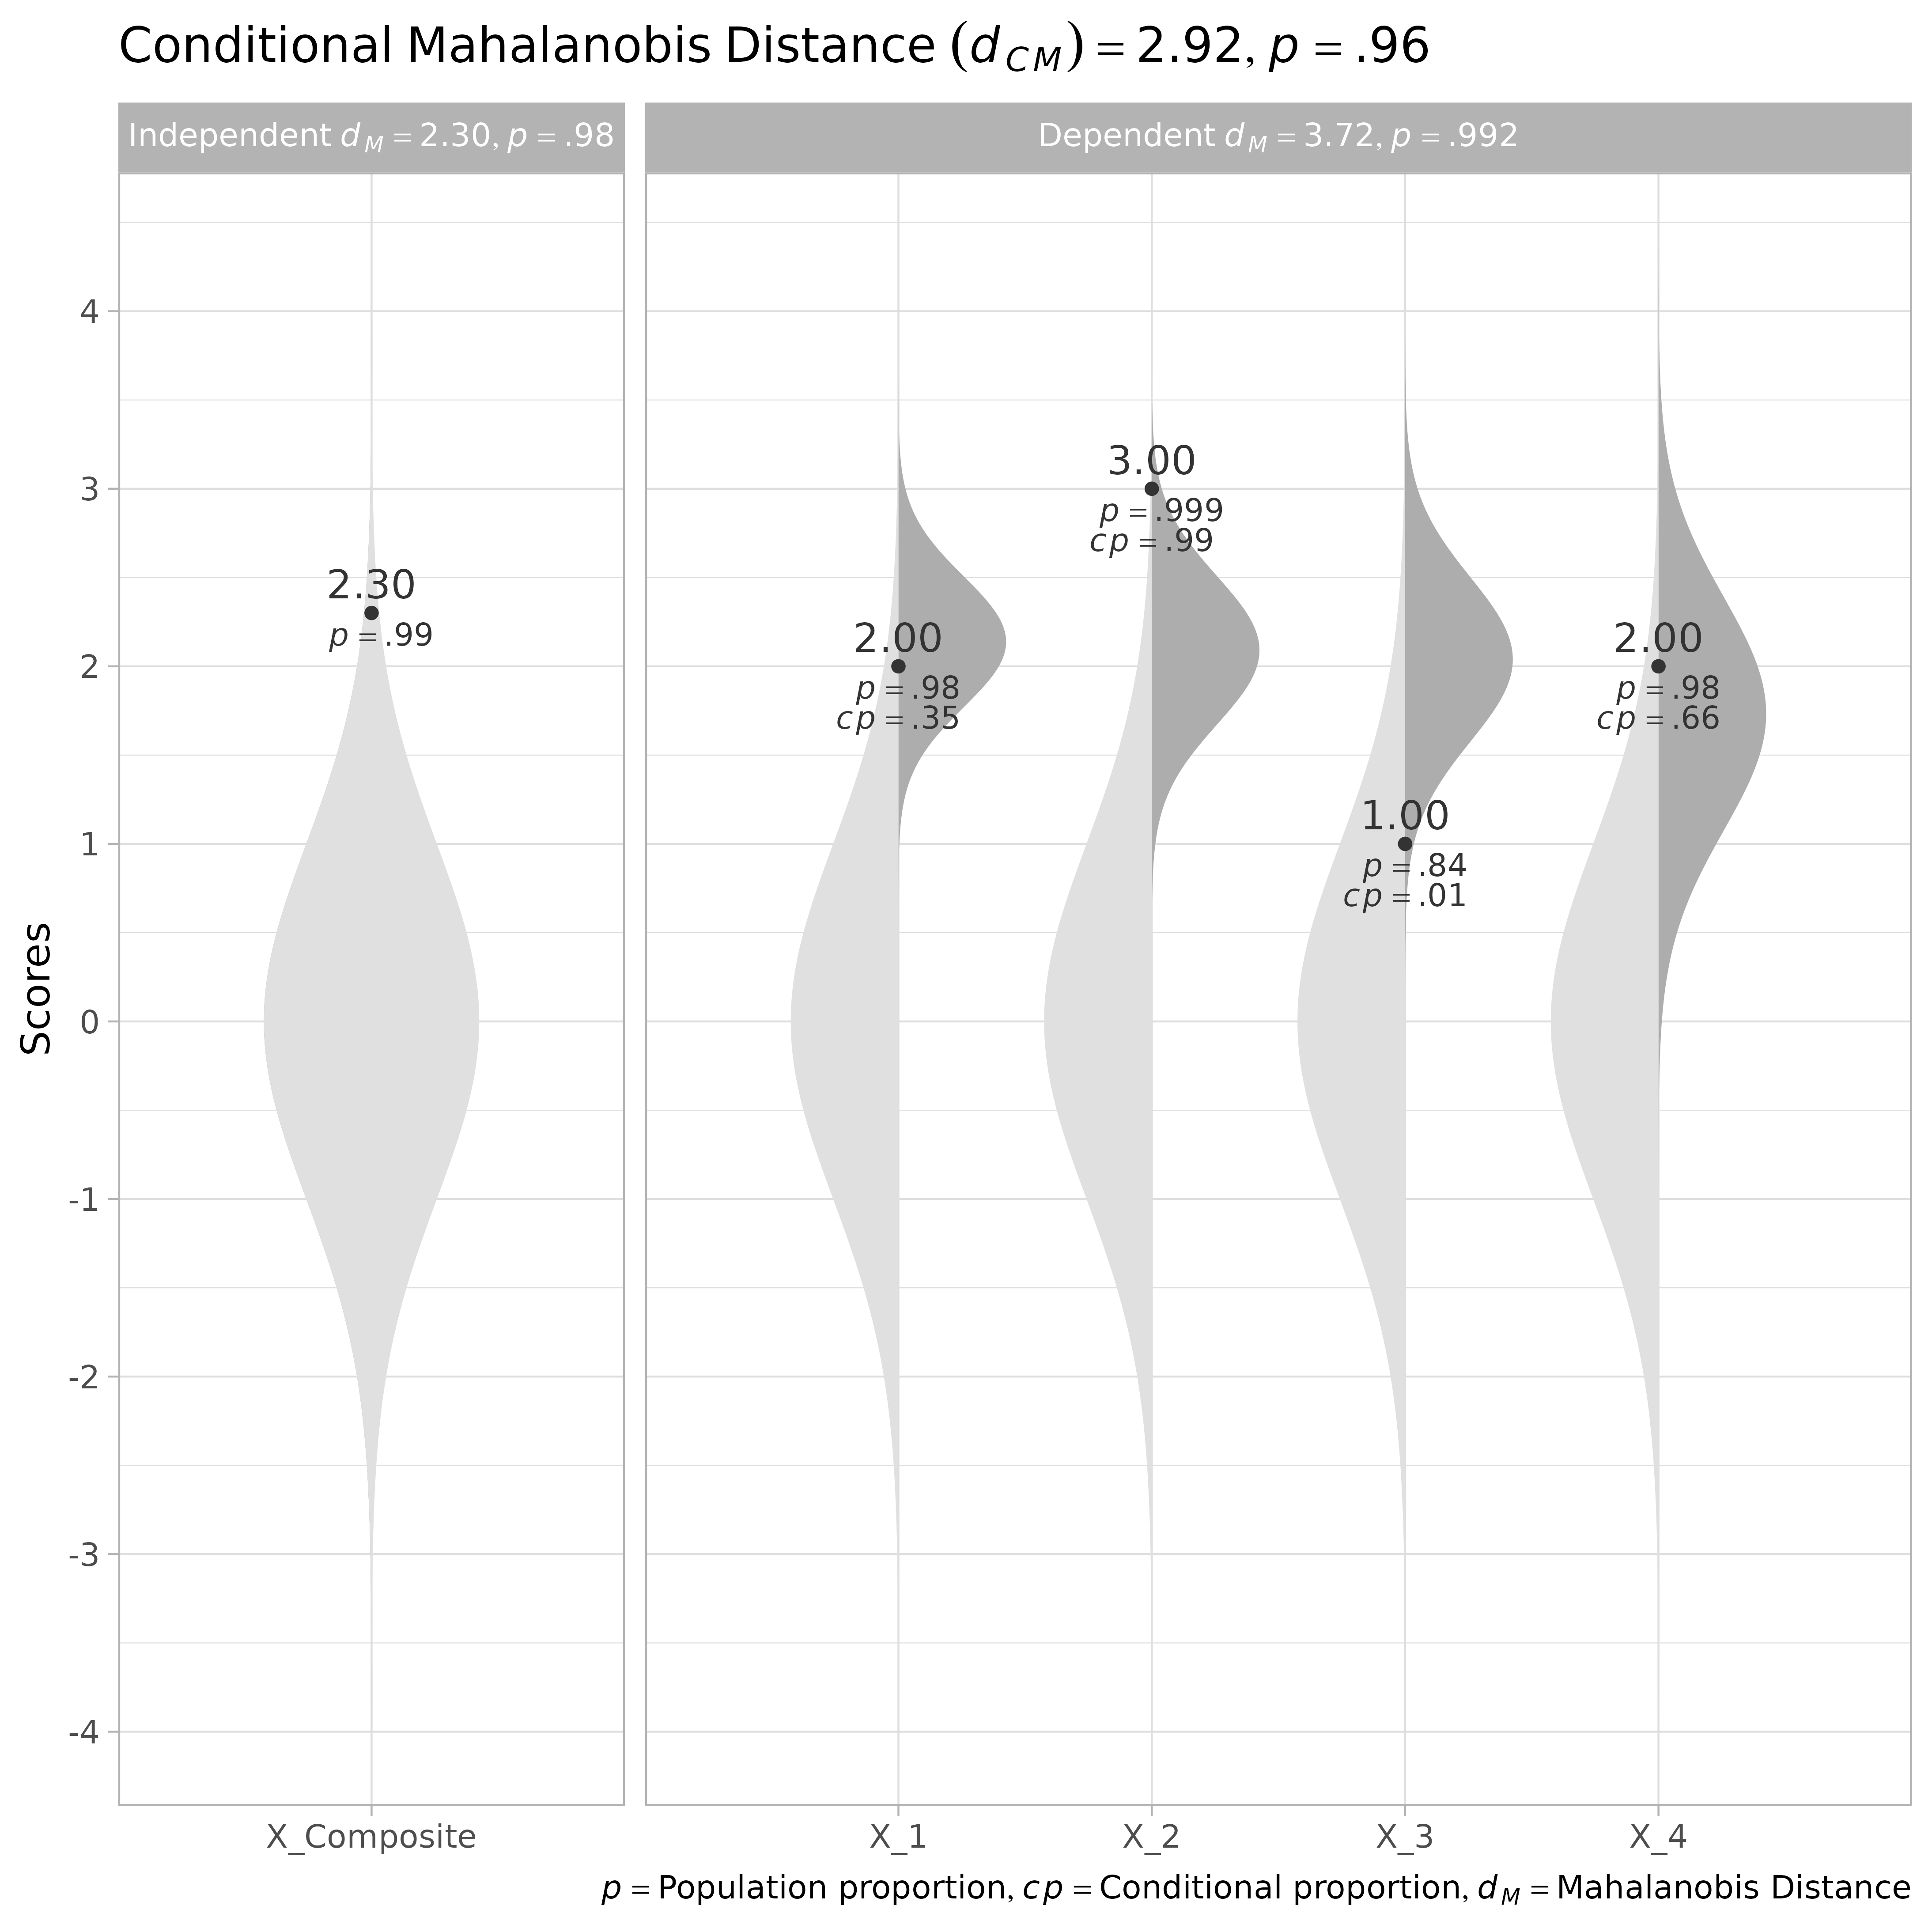 A profile of z-scores in the context of population distributions (darker gray) and conditional distributions (lighter gray) controlling for overall composite score.